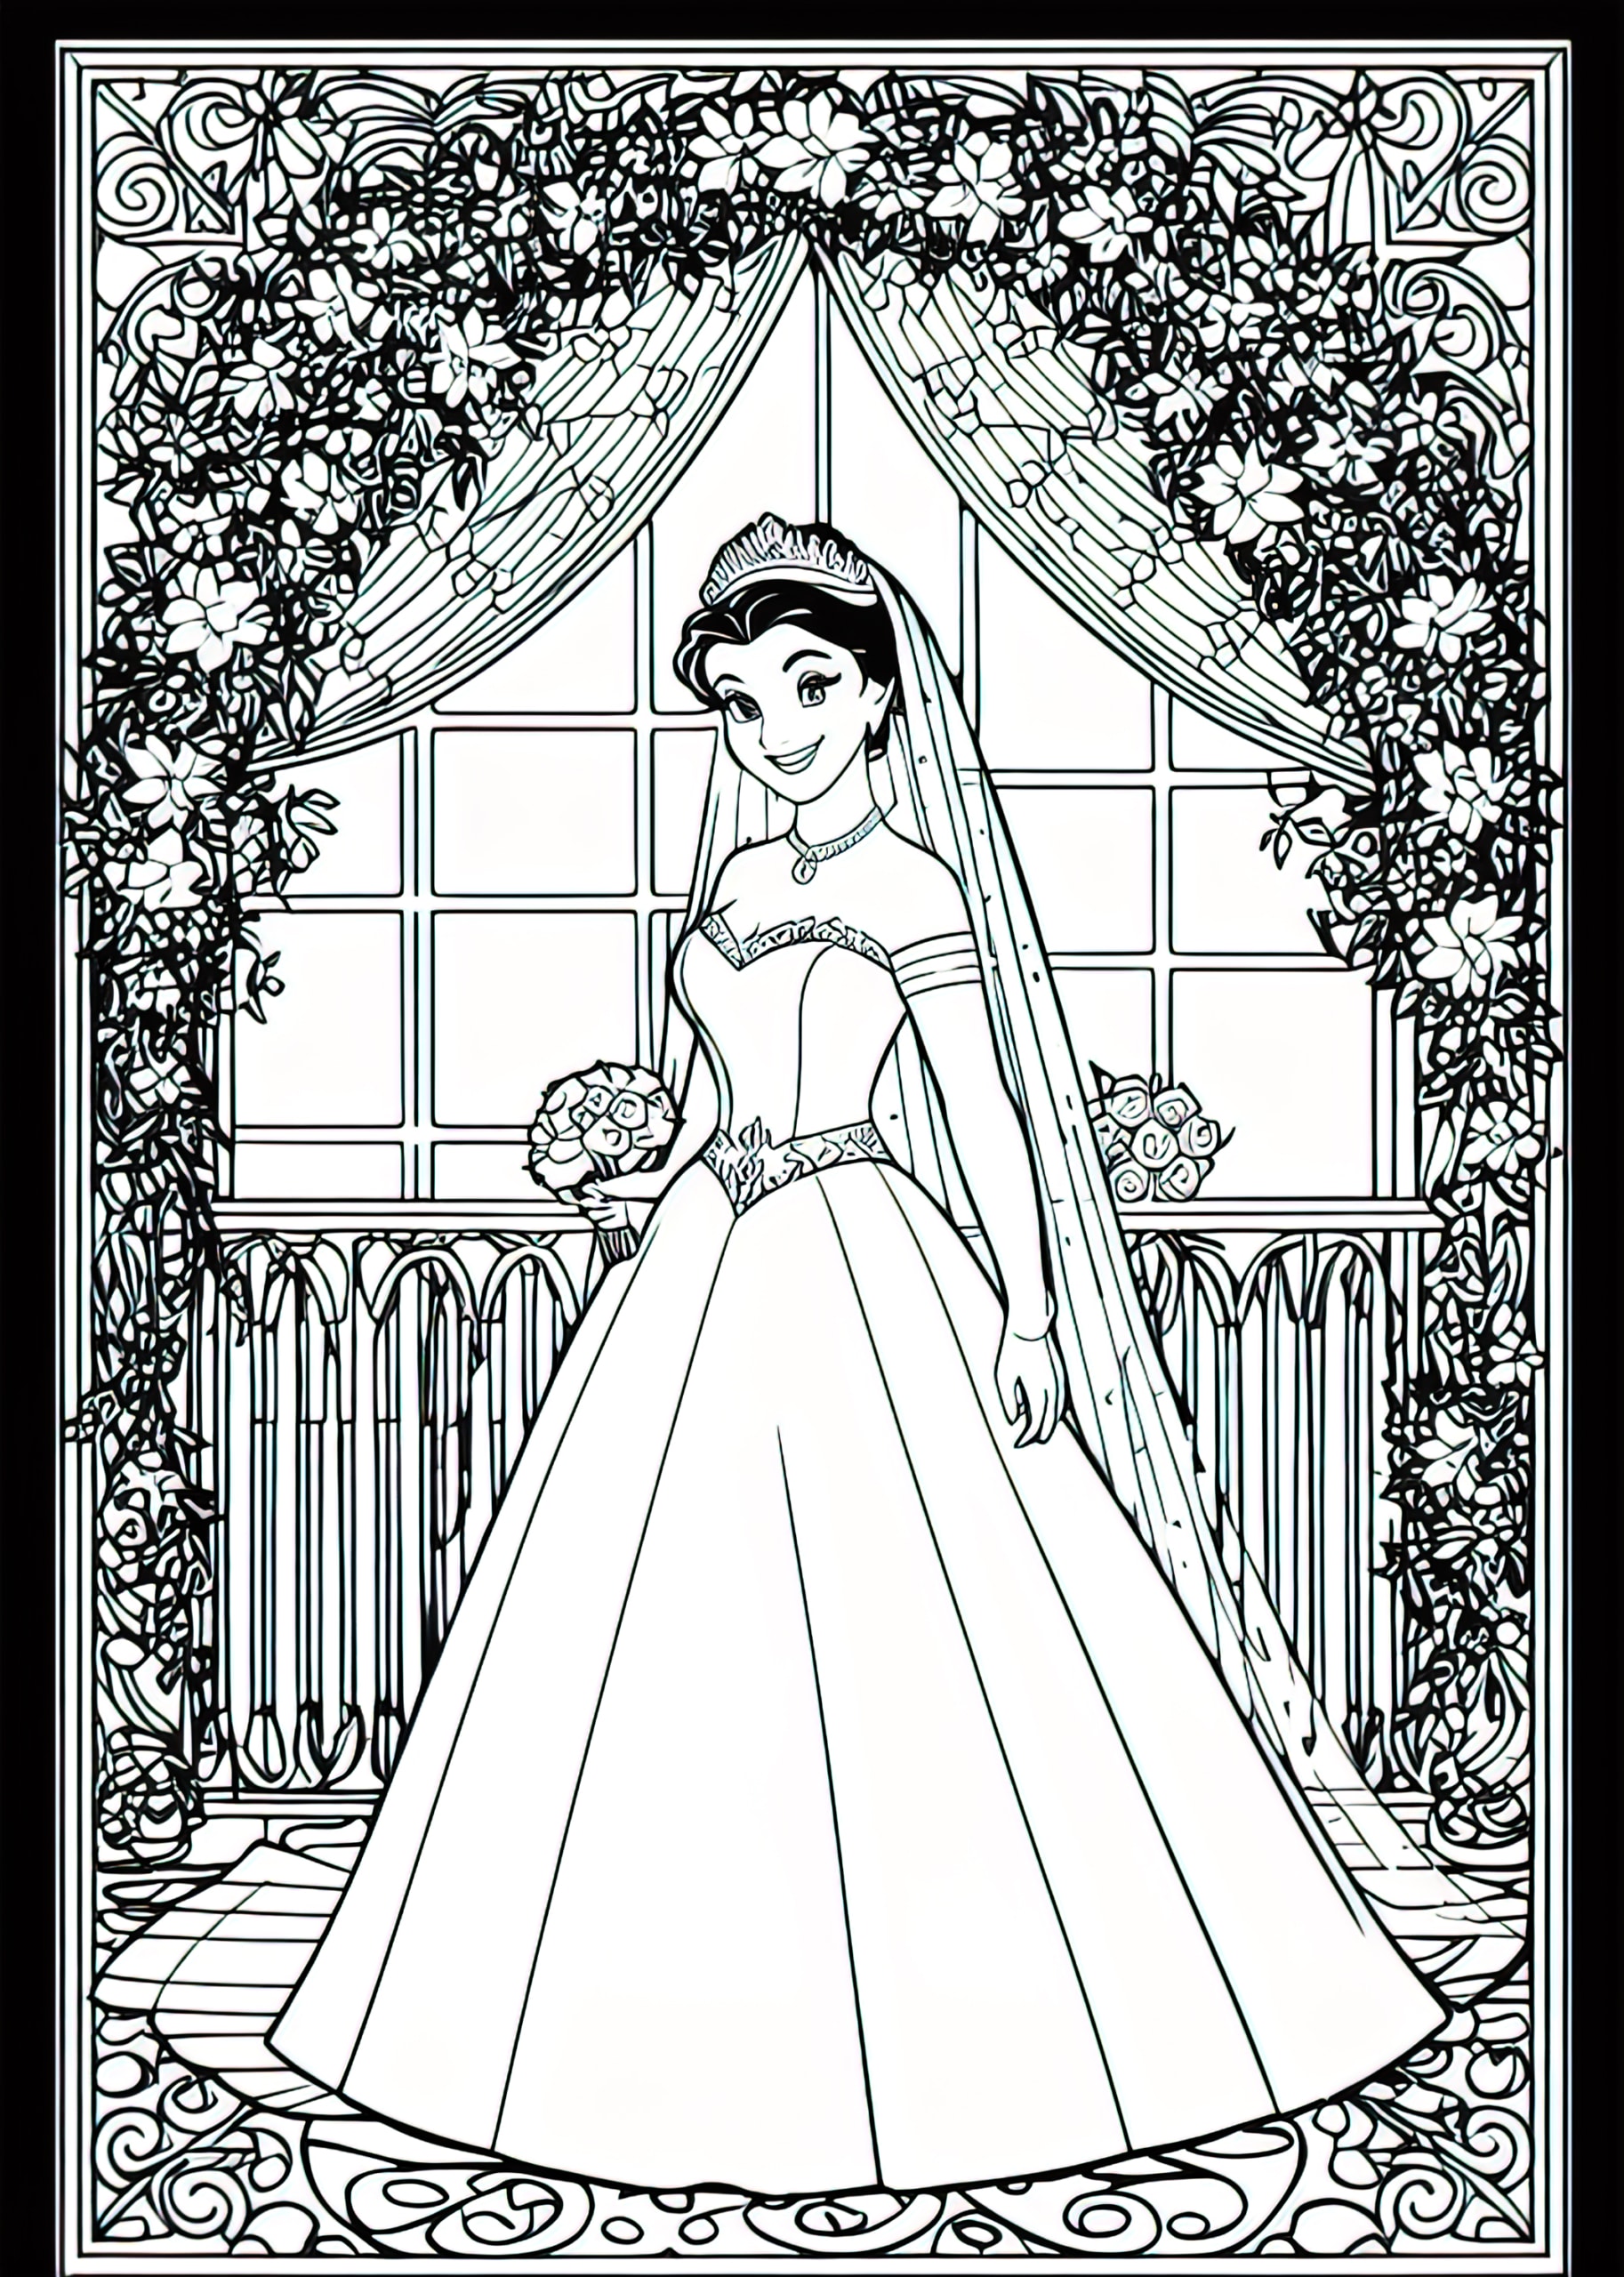 Cinderella colouring page colouring pages Cinderella colouring pages.